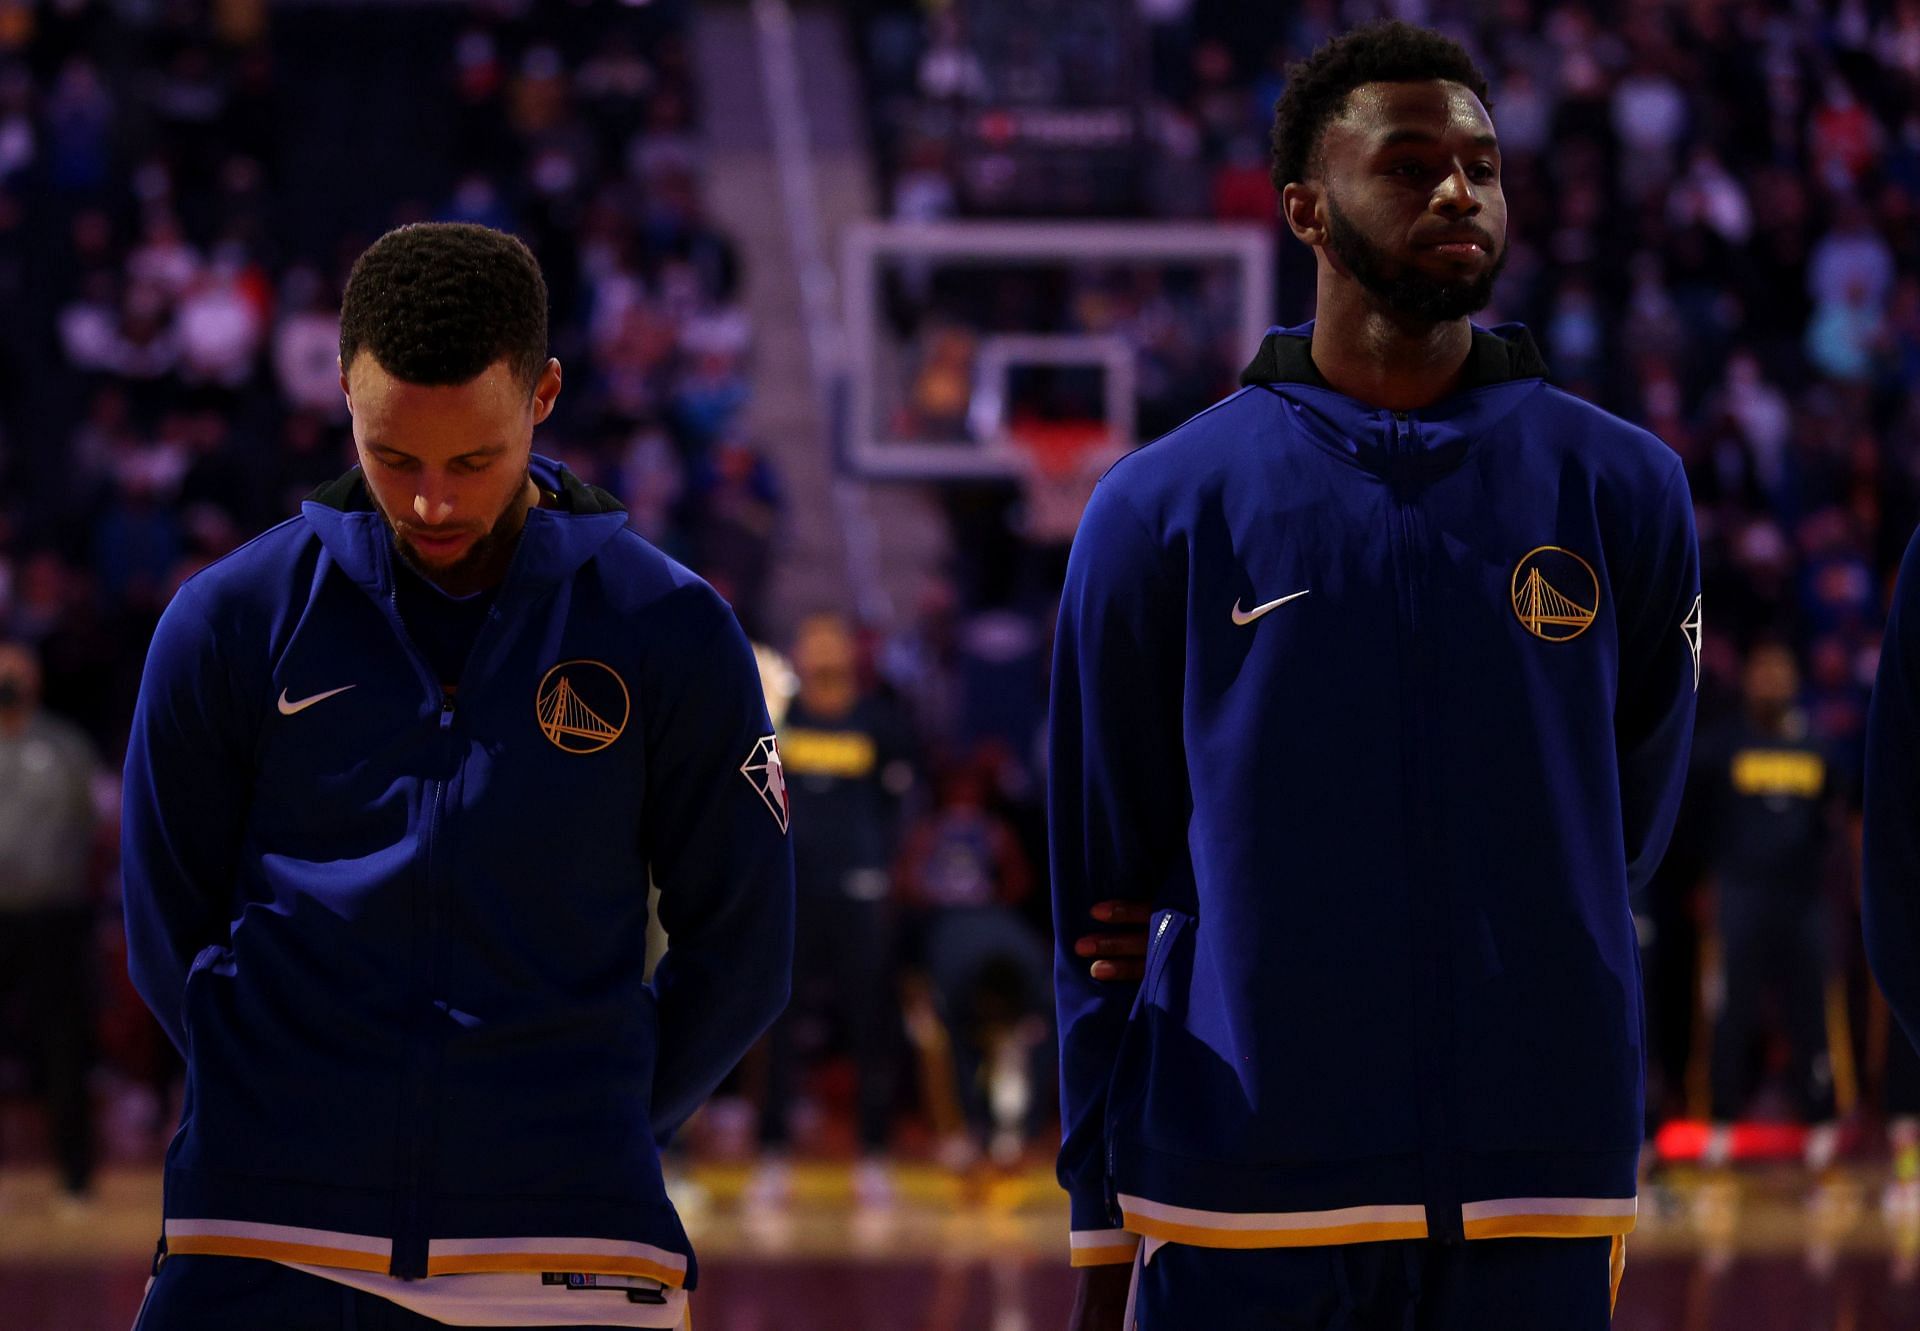 The Golden State Warriors have been one of the most impressive teams in the NBA preseason.